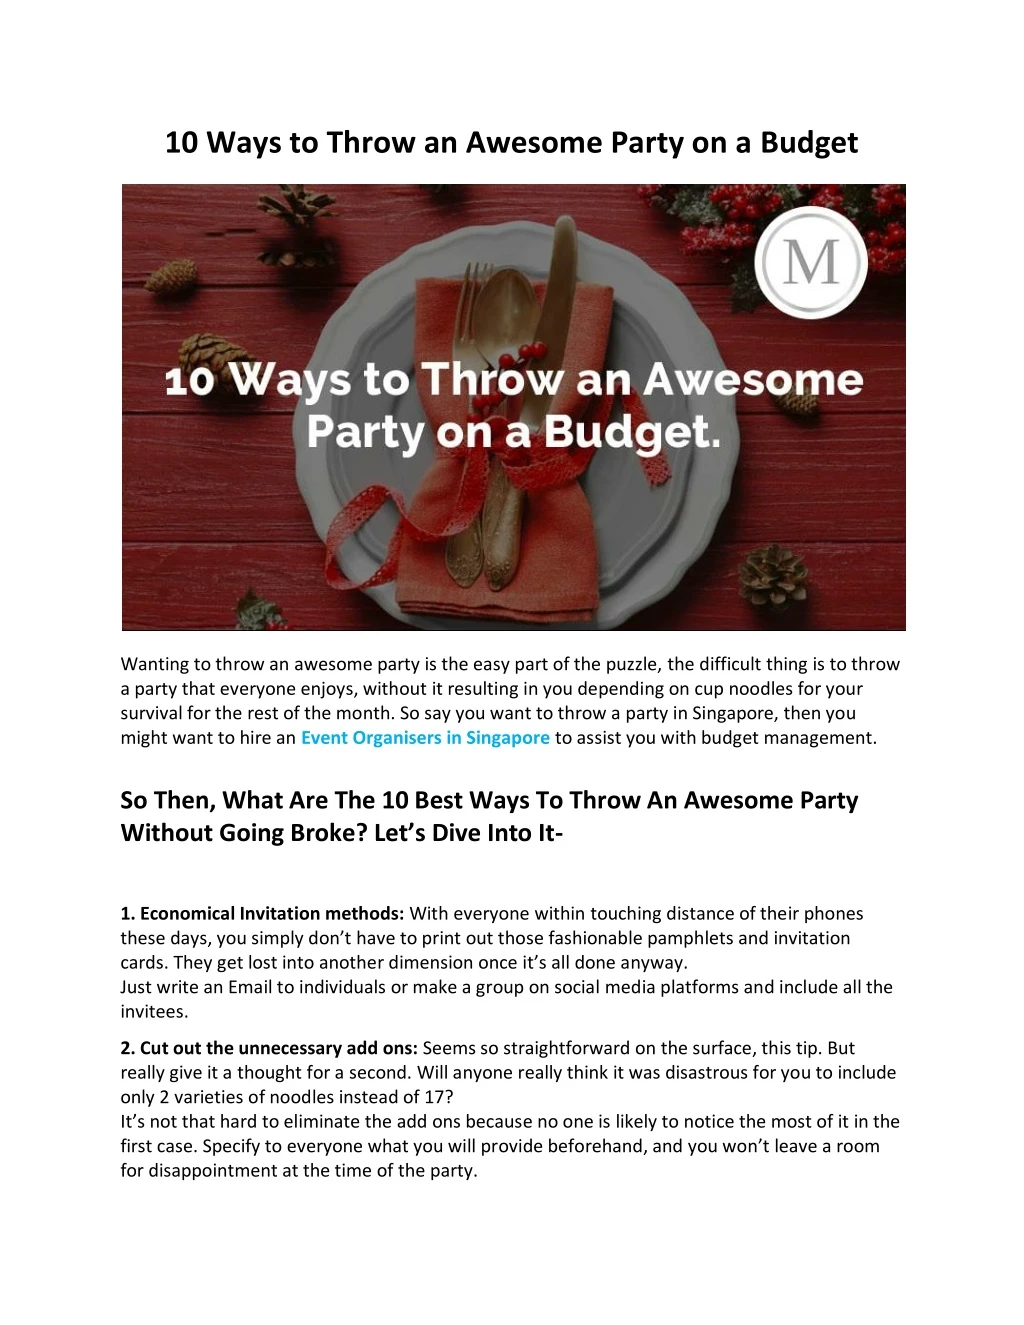 10 ways to throw an awesome party on a budget